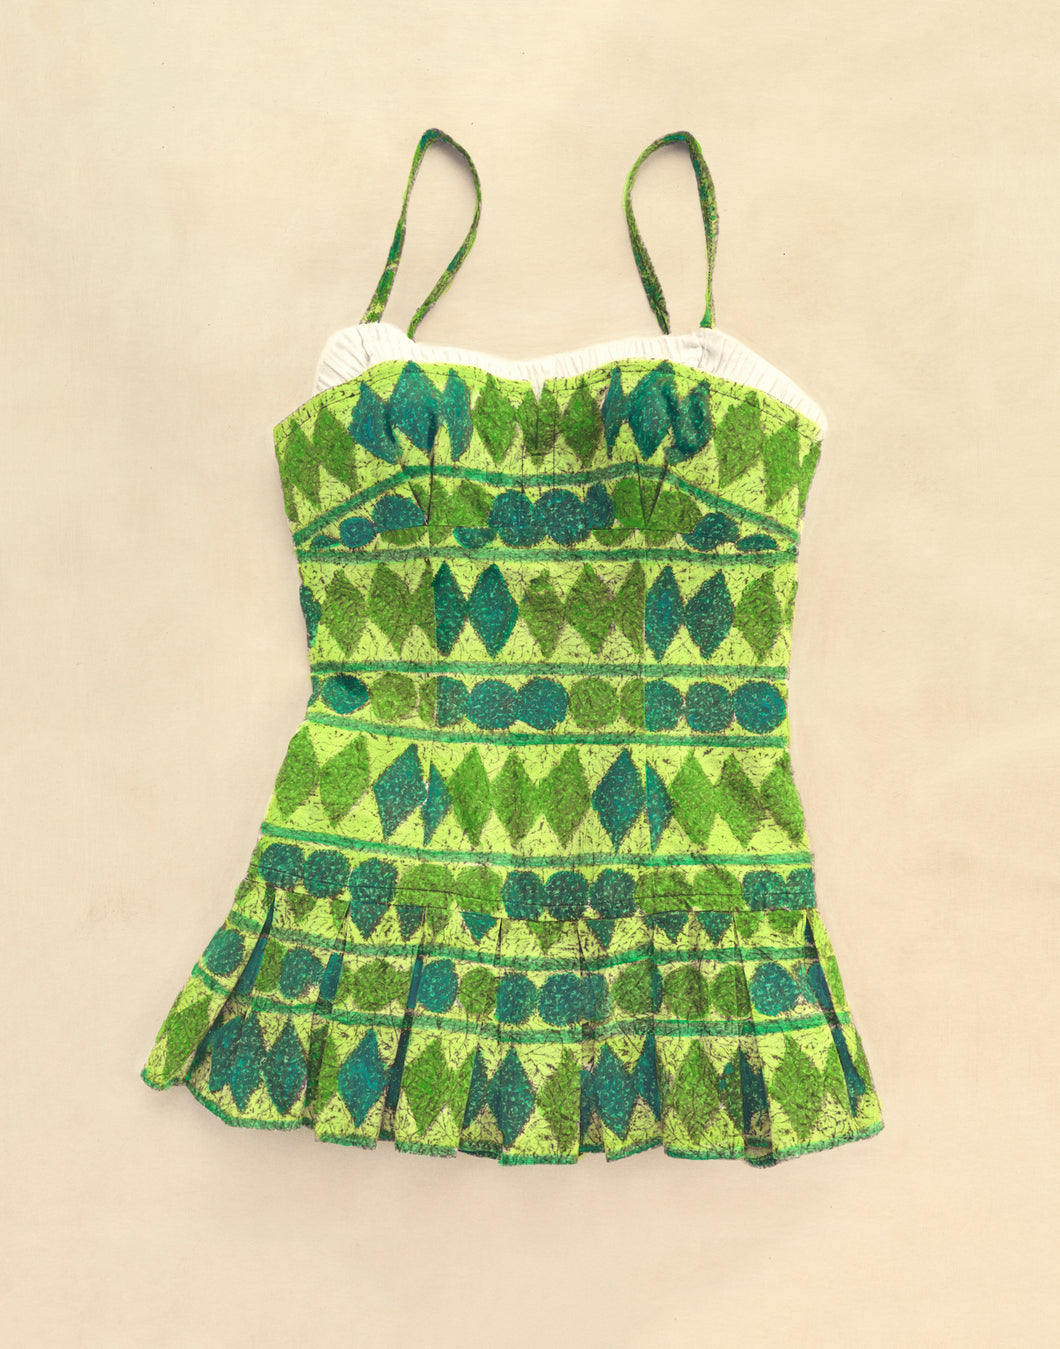 Double Take  in Lime/Turquoise Green Vintage Swimsuit Art